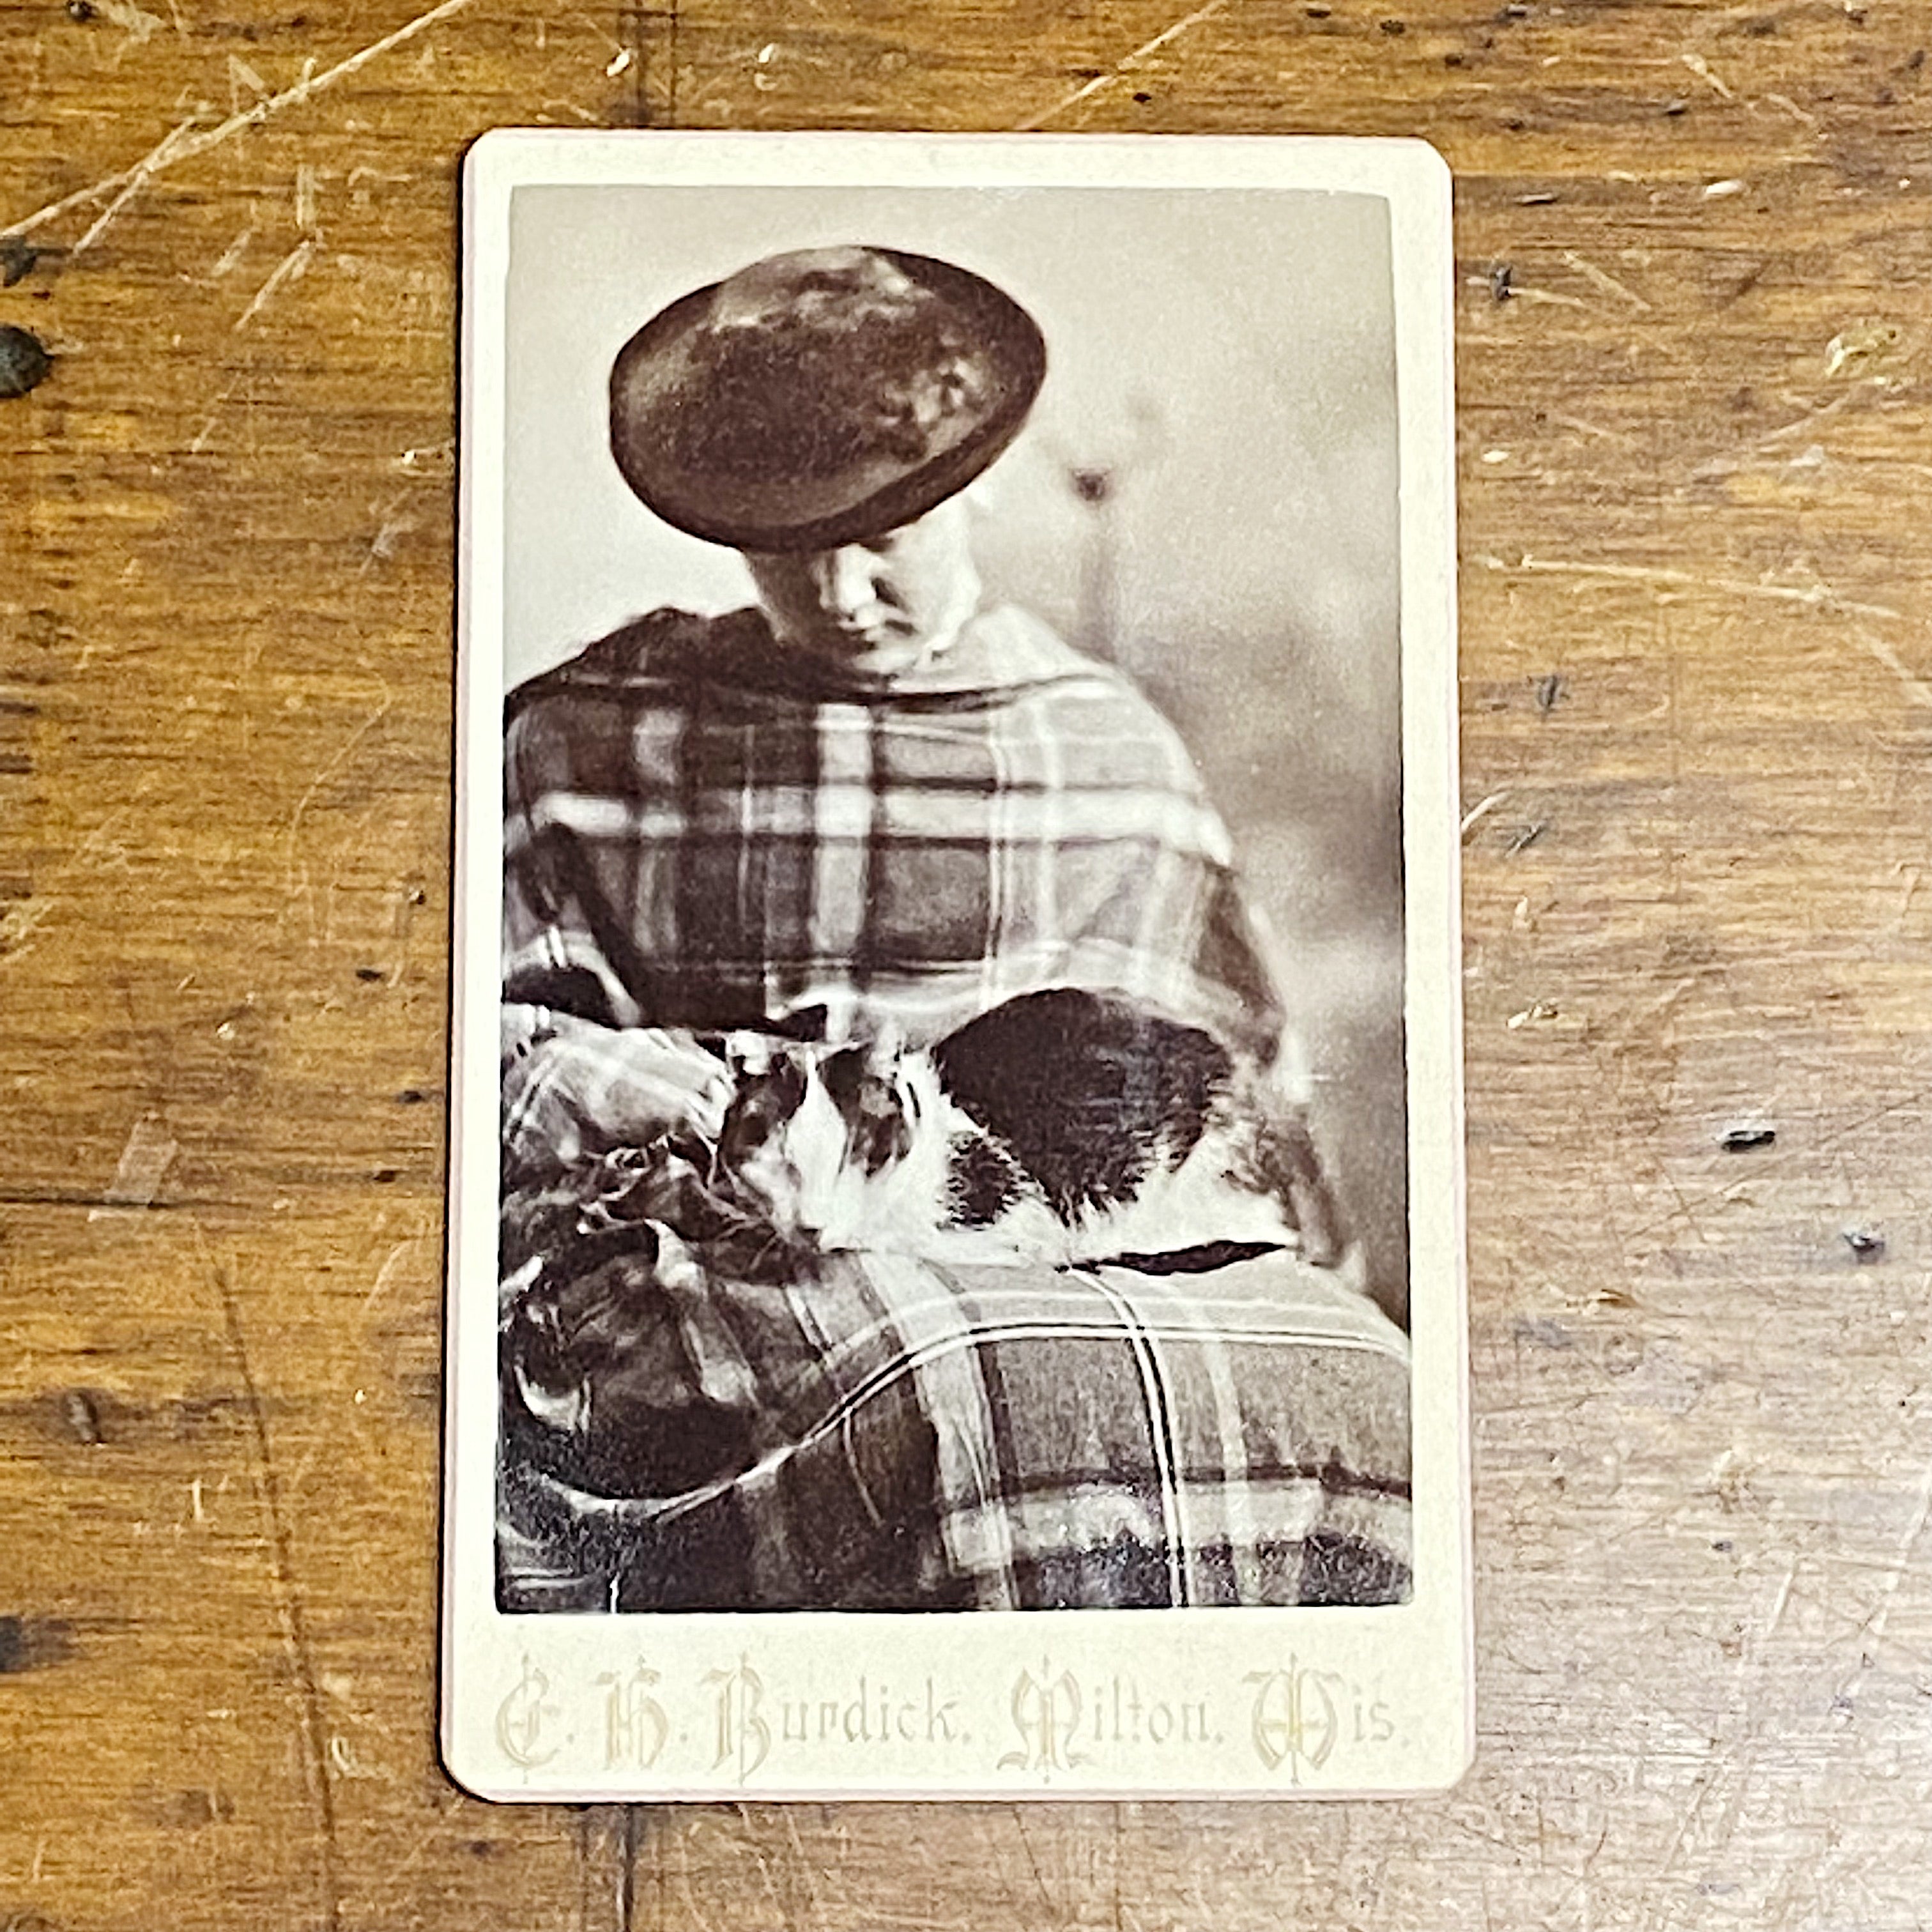 Antique Cabinet Card of Woman and Cat Sleeping - Unusual 19th Century Photography - Ellery Burdick Wisconsin - Rare Animal Photos